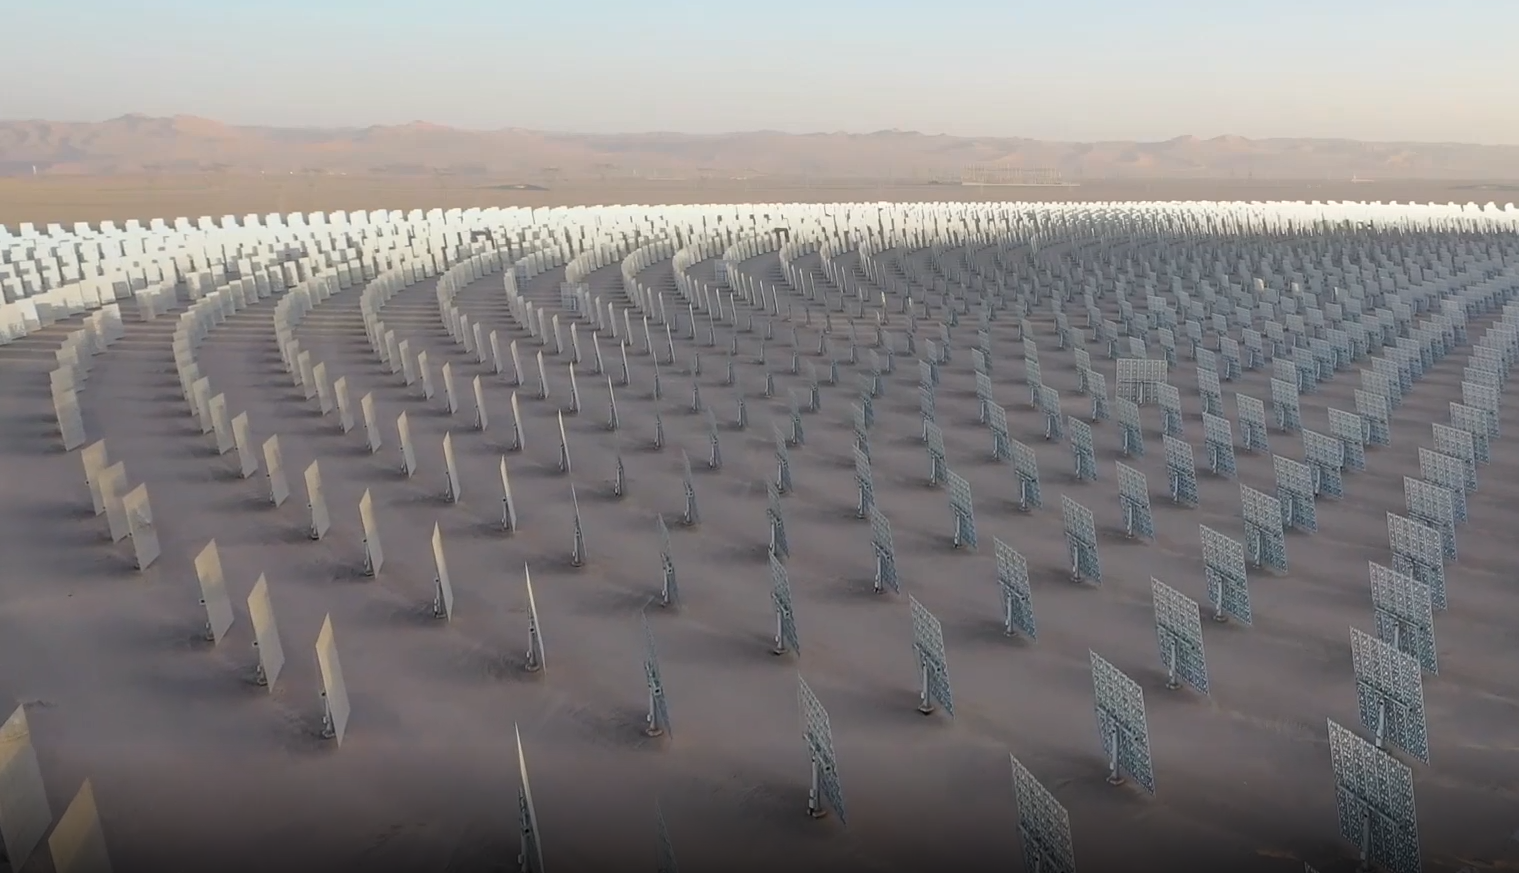 12,000 mirrors! A peek at China's largest "super mirror power plant" in Dunhuang